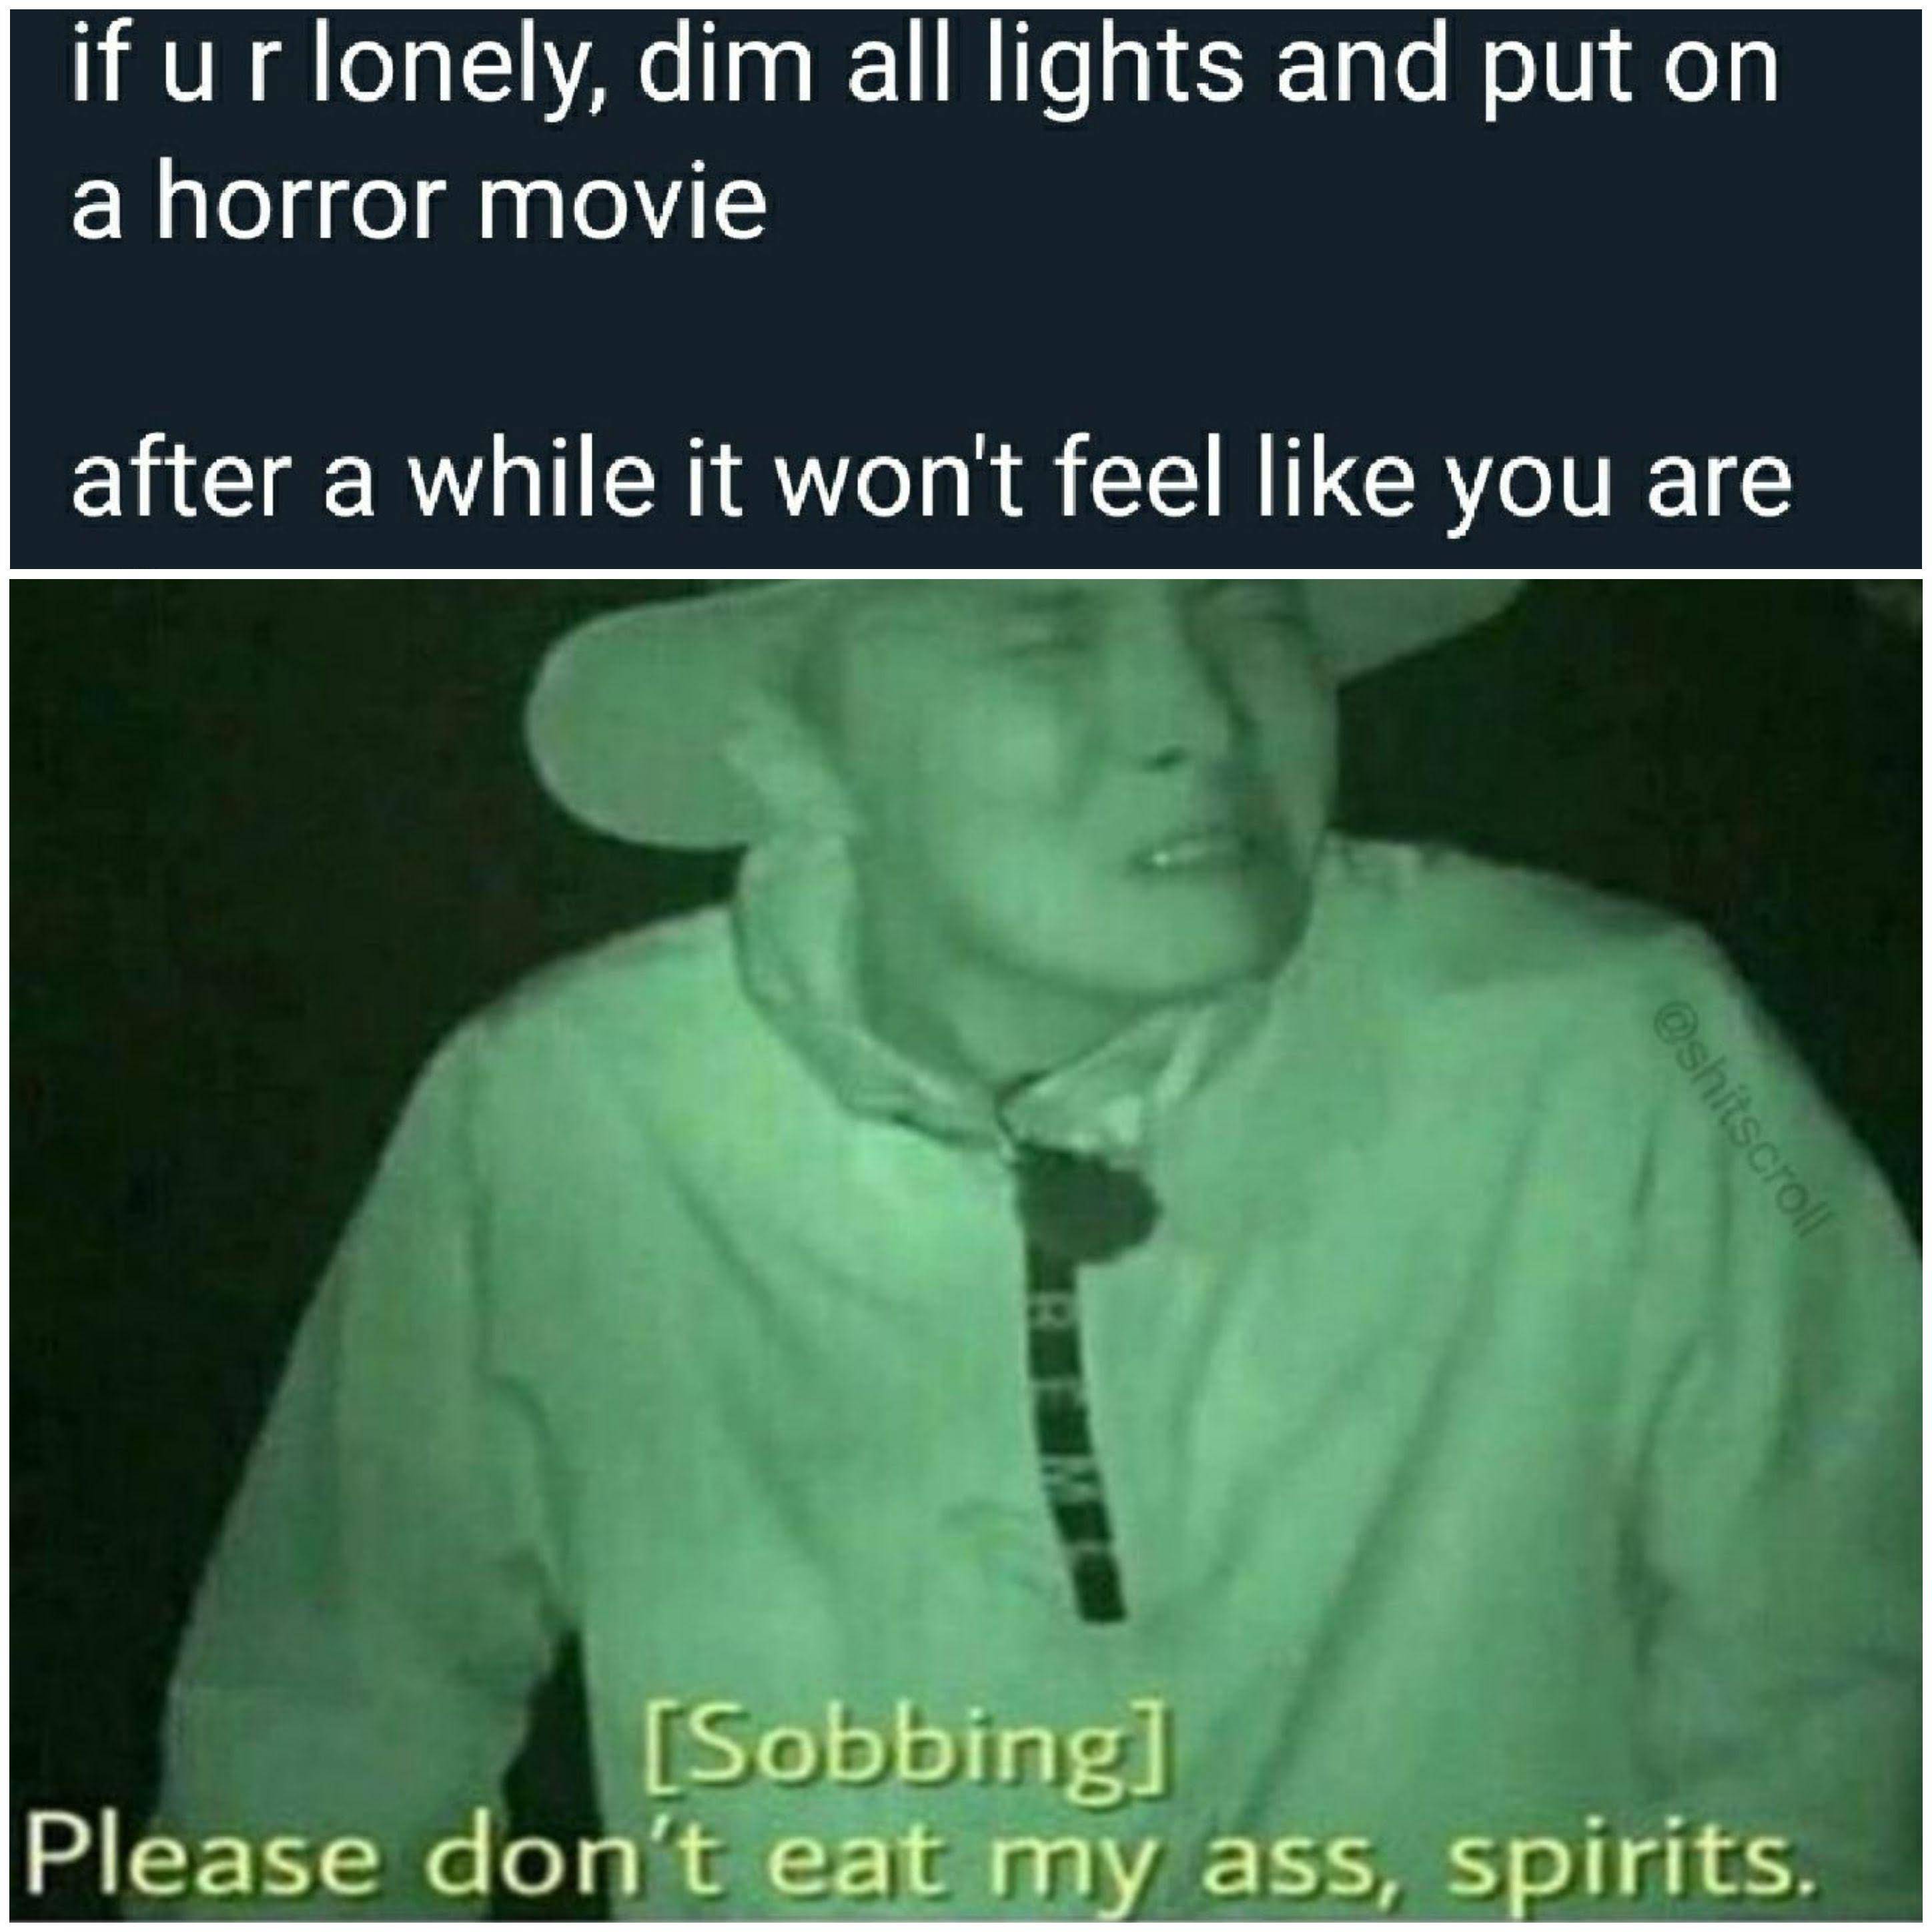 sex memes - spirits meme - if ur lonely, dim all lights and put on a horror movie after a while it won't feel you are Sobbing Please don't eat my ass, spirits.